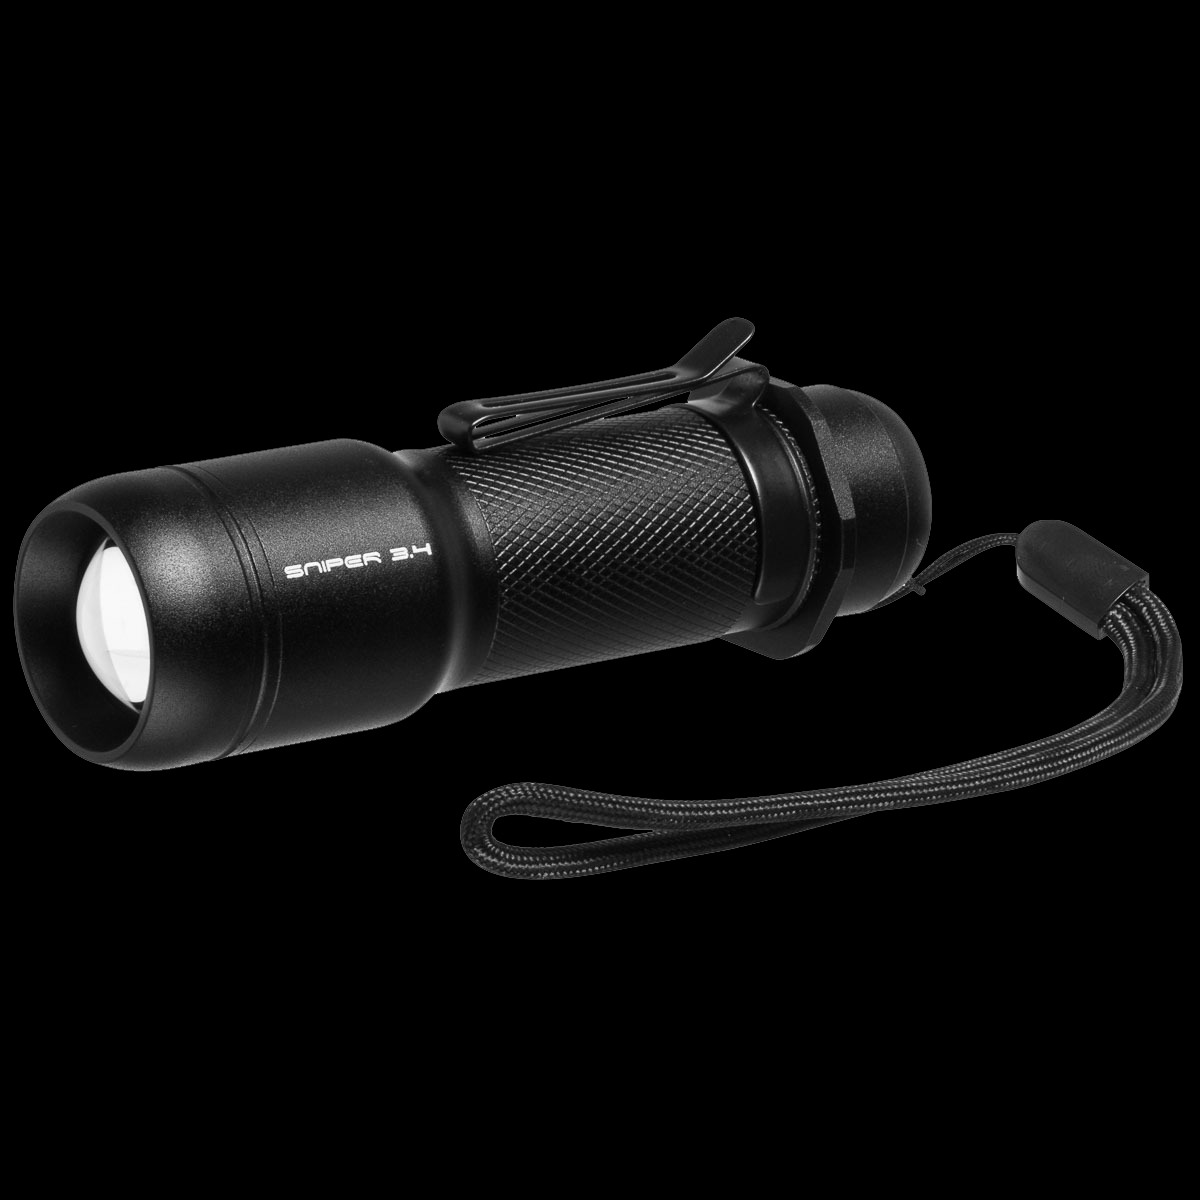 LED Flashlight with Focus, 600 lm, SNIPER 3.4